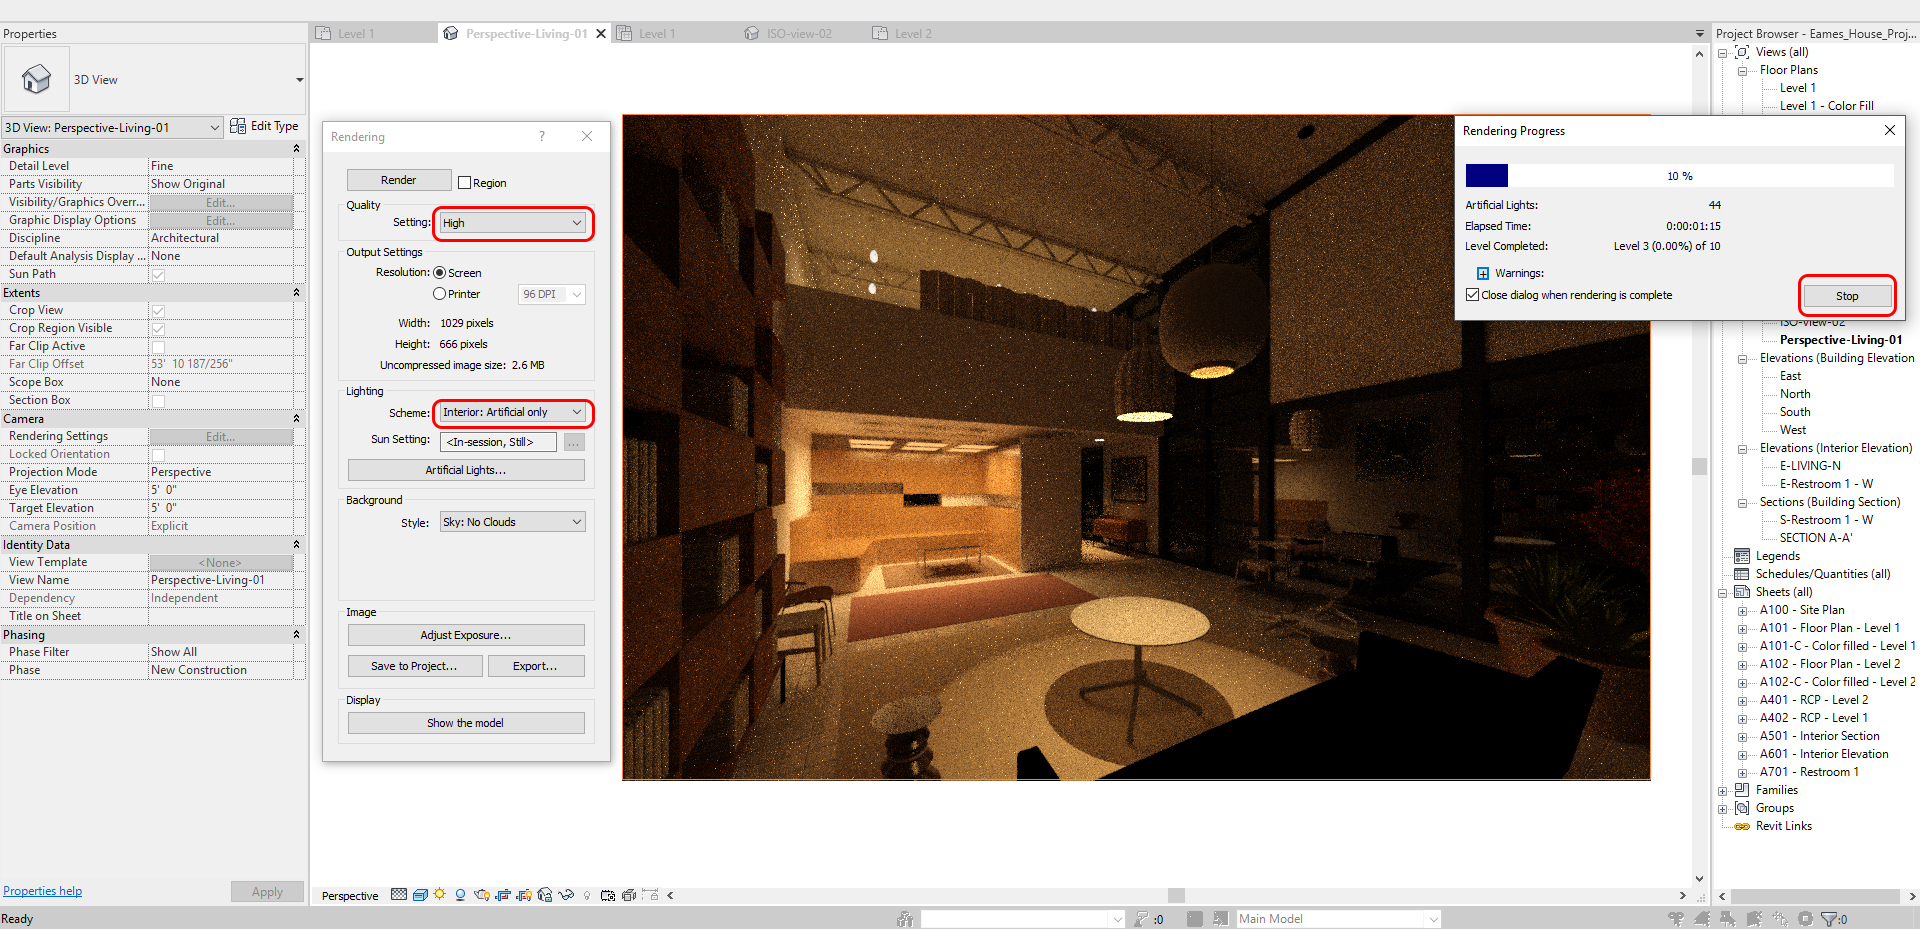 This image indicates how to set a test render for artificial lighting.